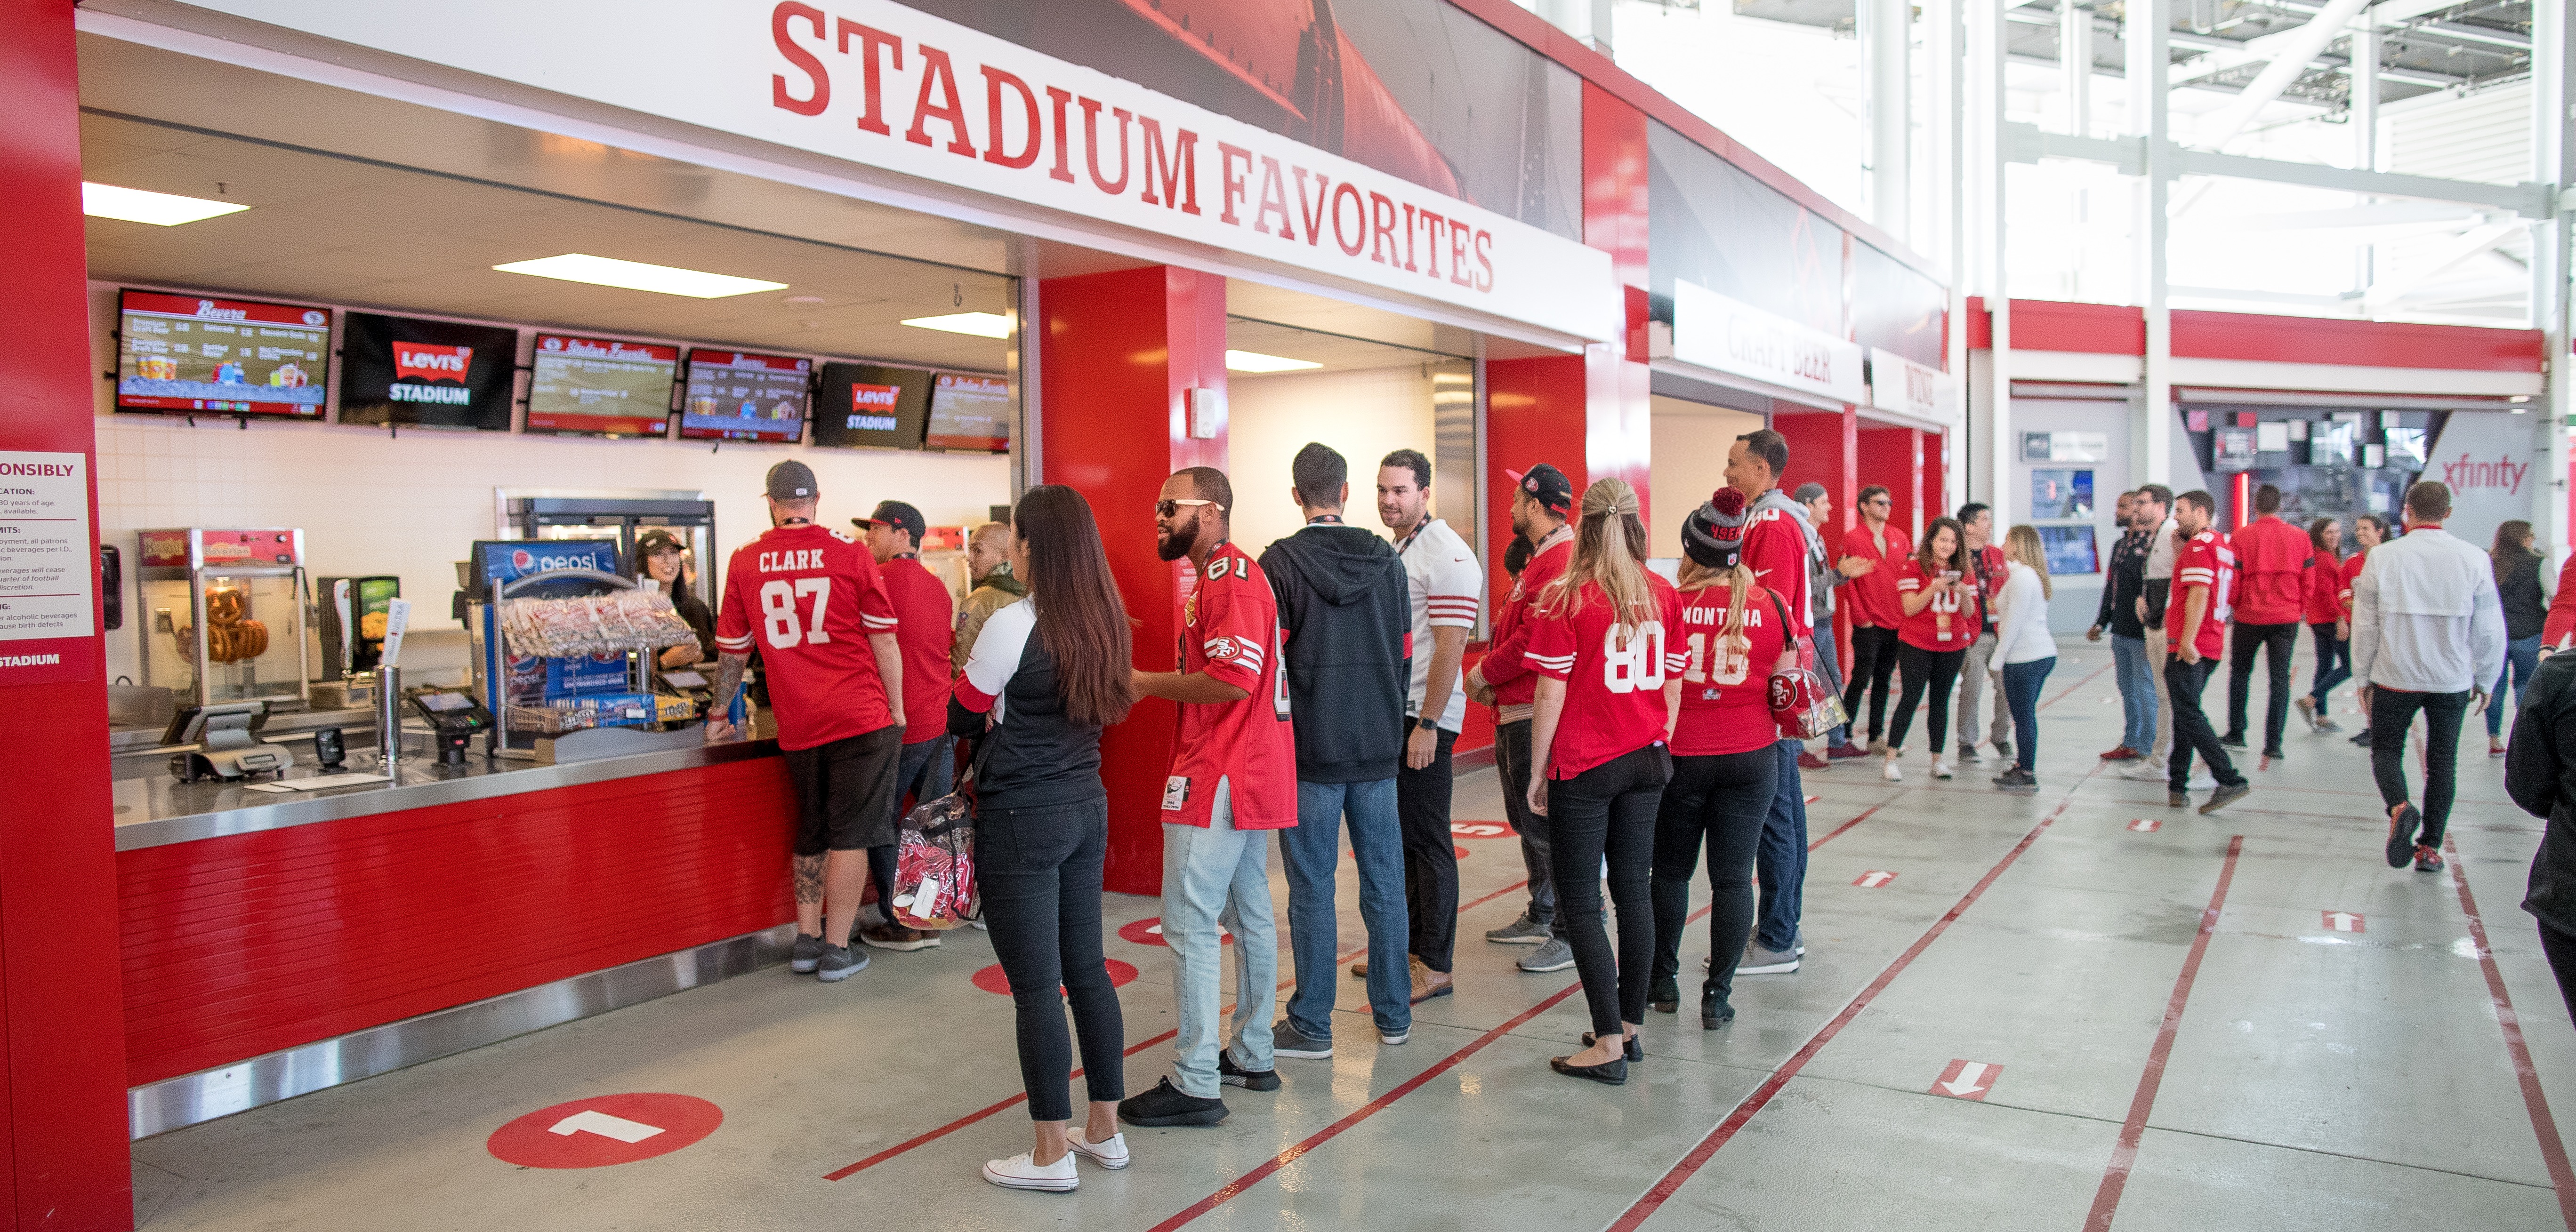 San Francisco 49ers introduce 'unlimited food and drink' at Levi's Stadium  | Stadia Magazine